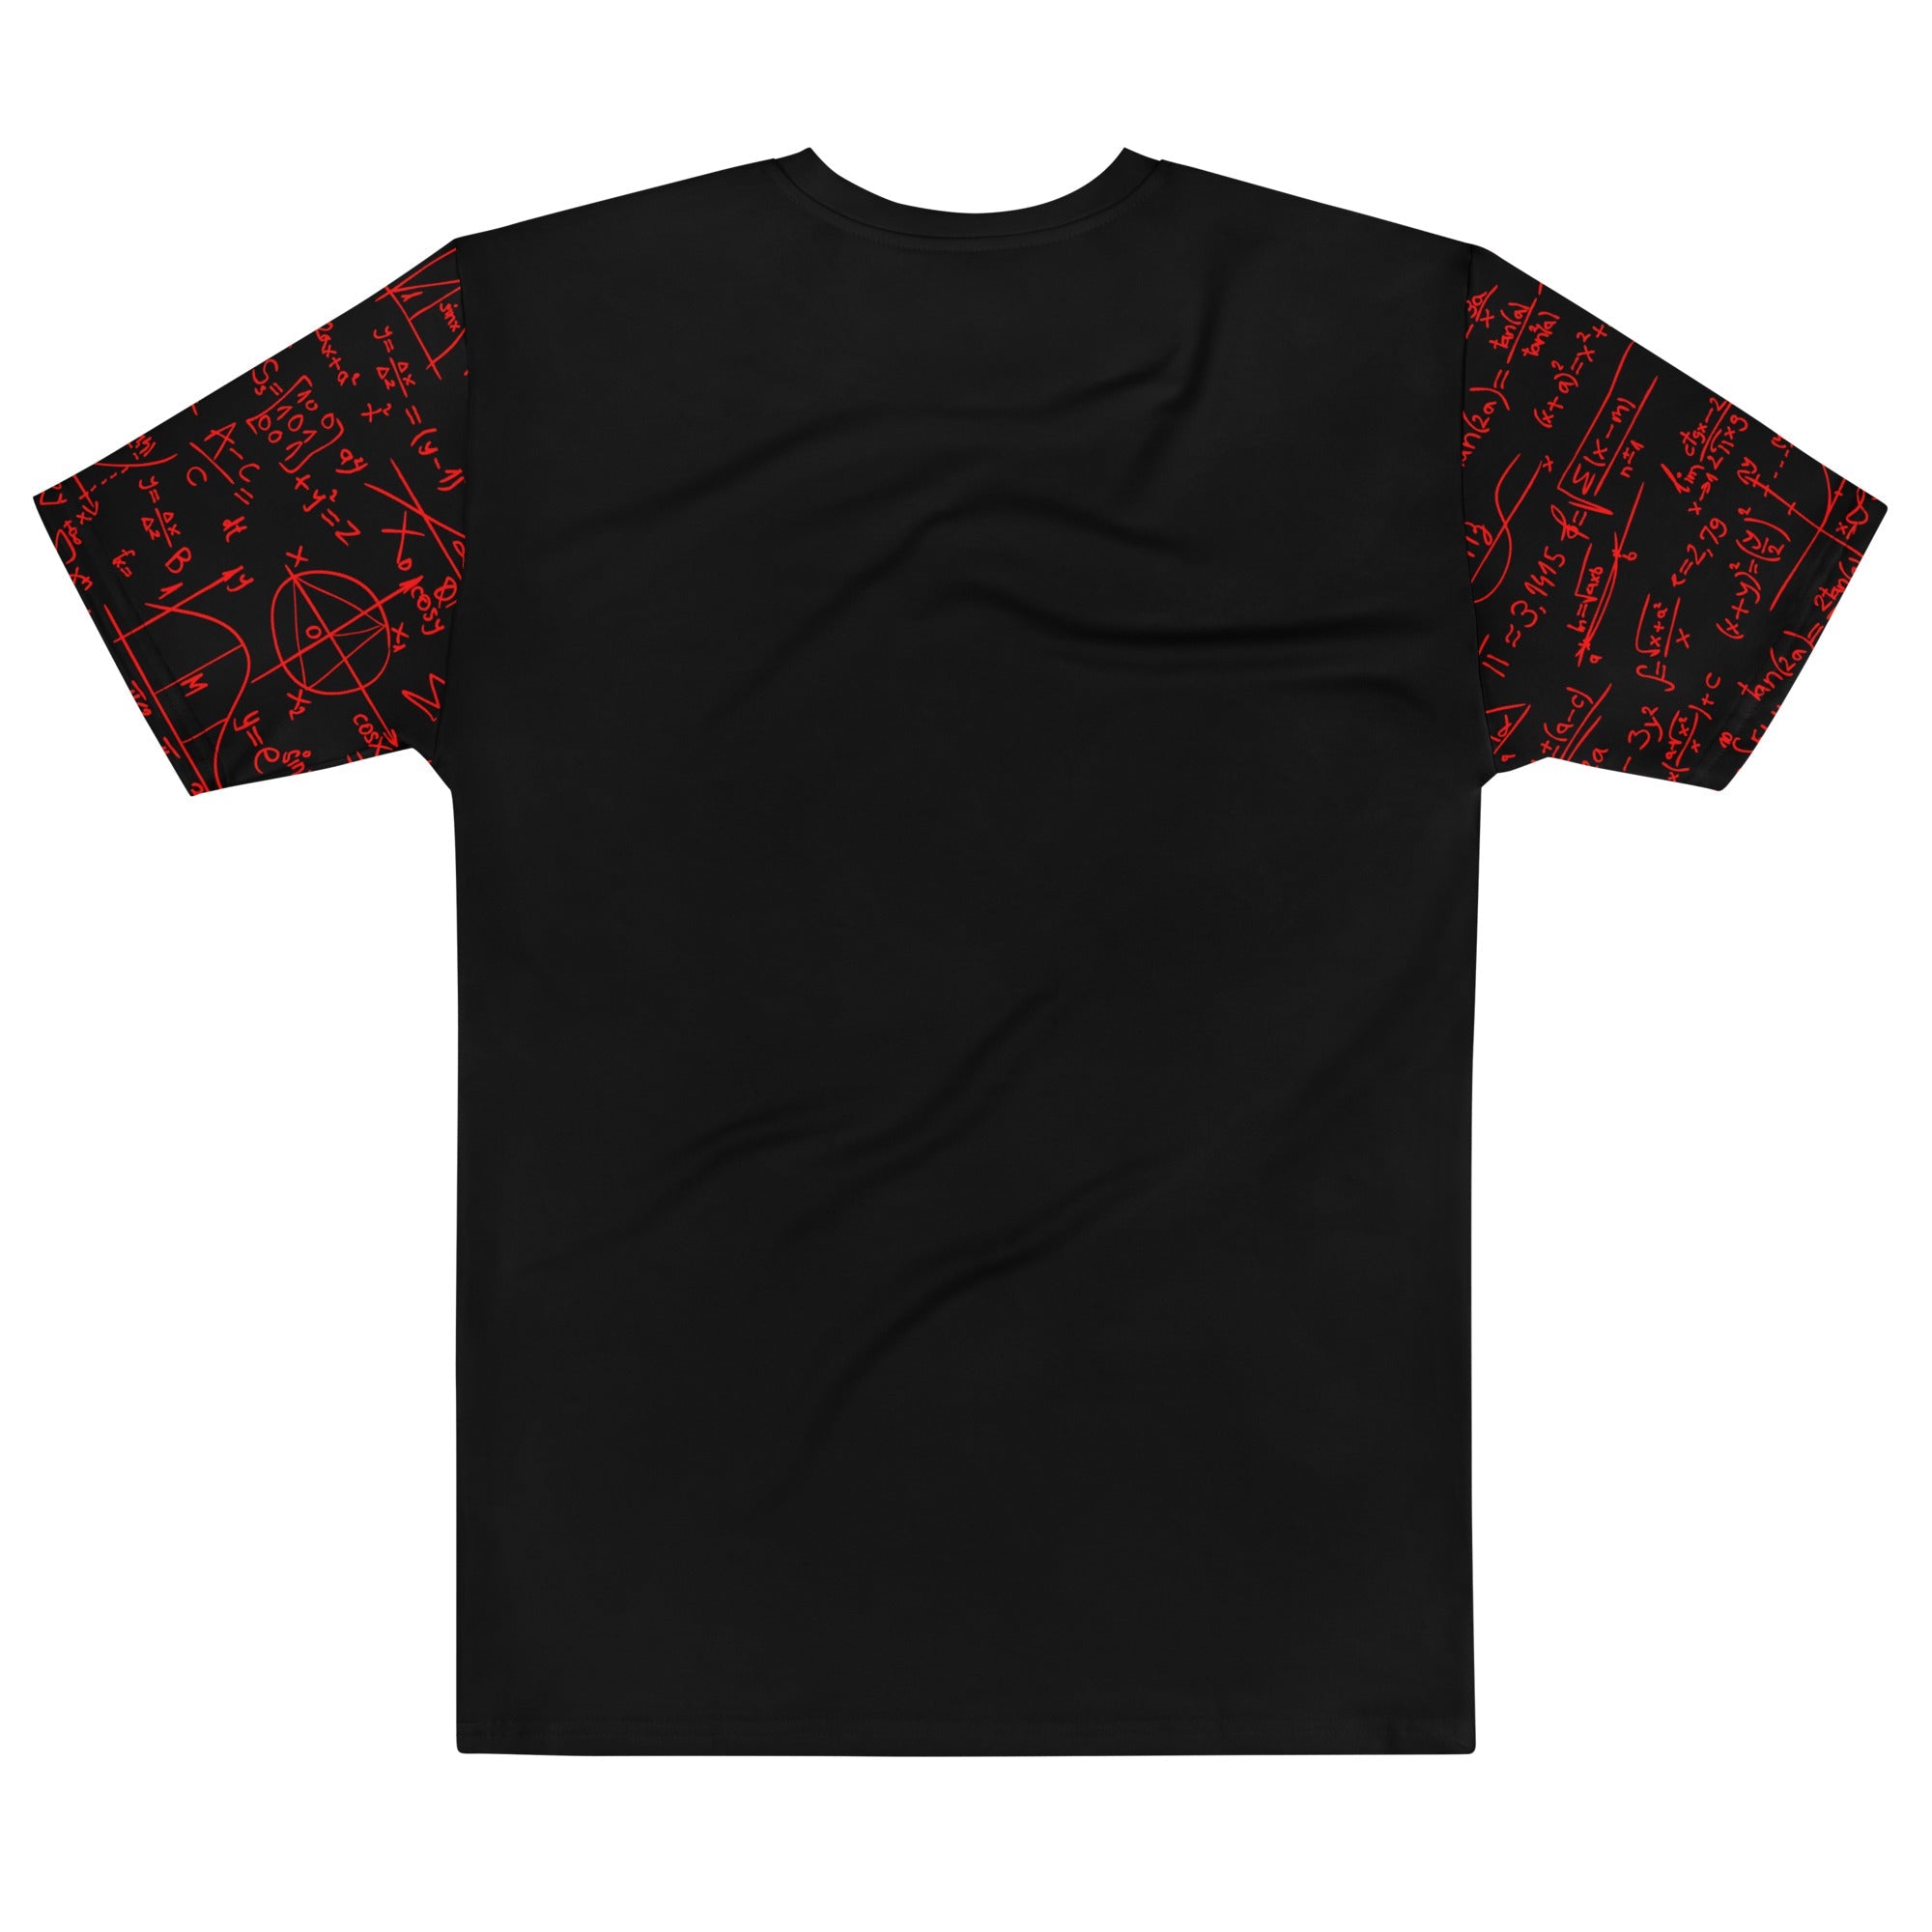 black and red graphic tee mens